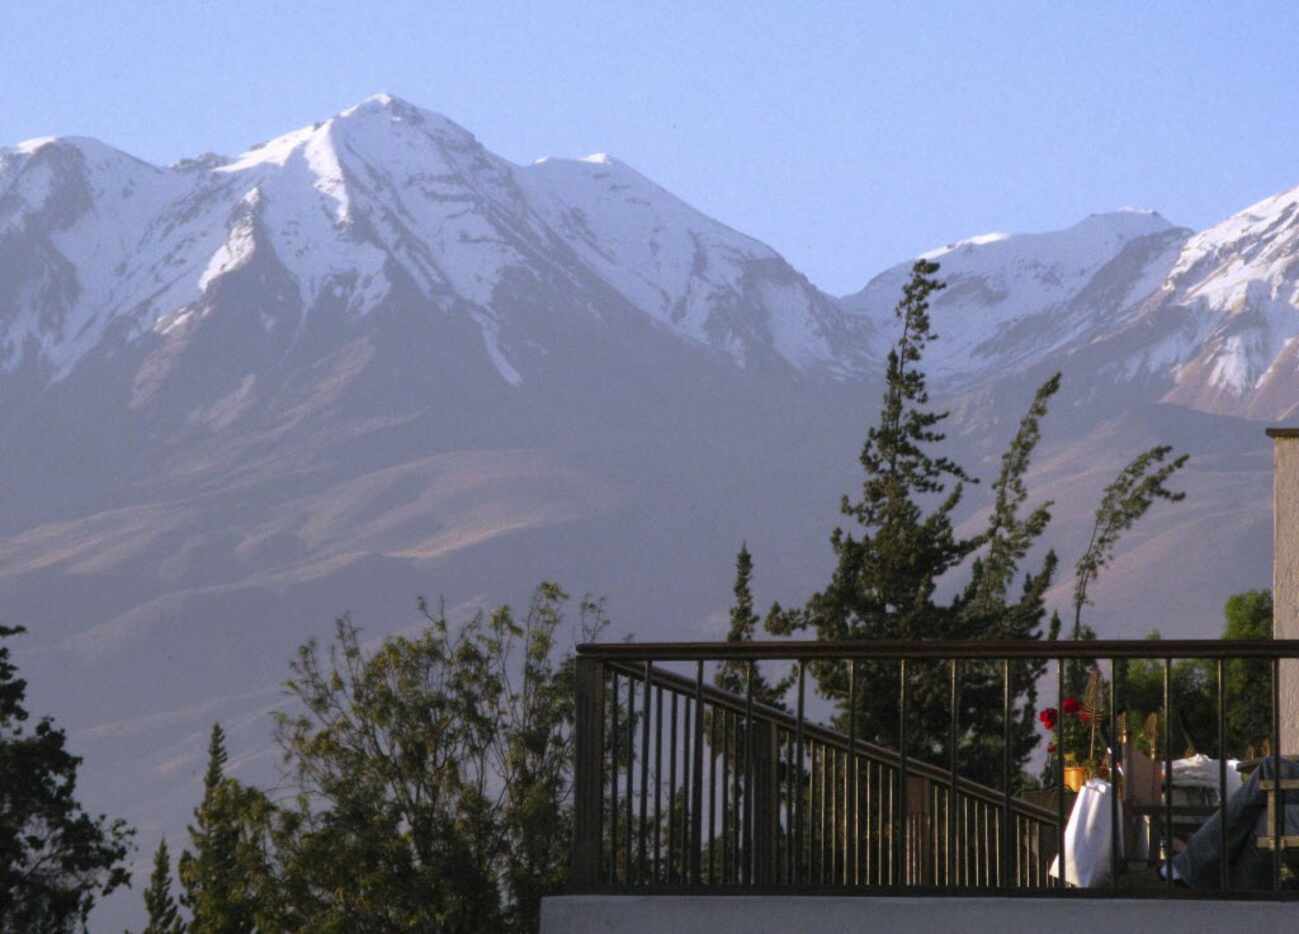 A view of Misti Volcano, an icon for the city of Arequipa, can be seen from the deck of Casa...